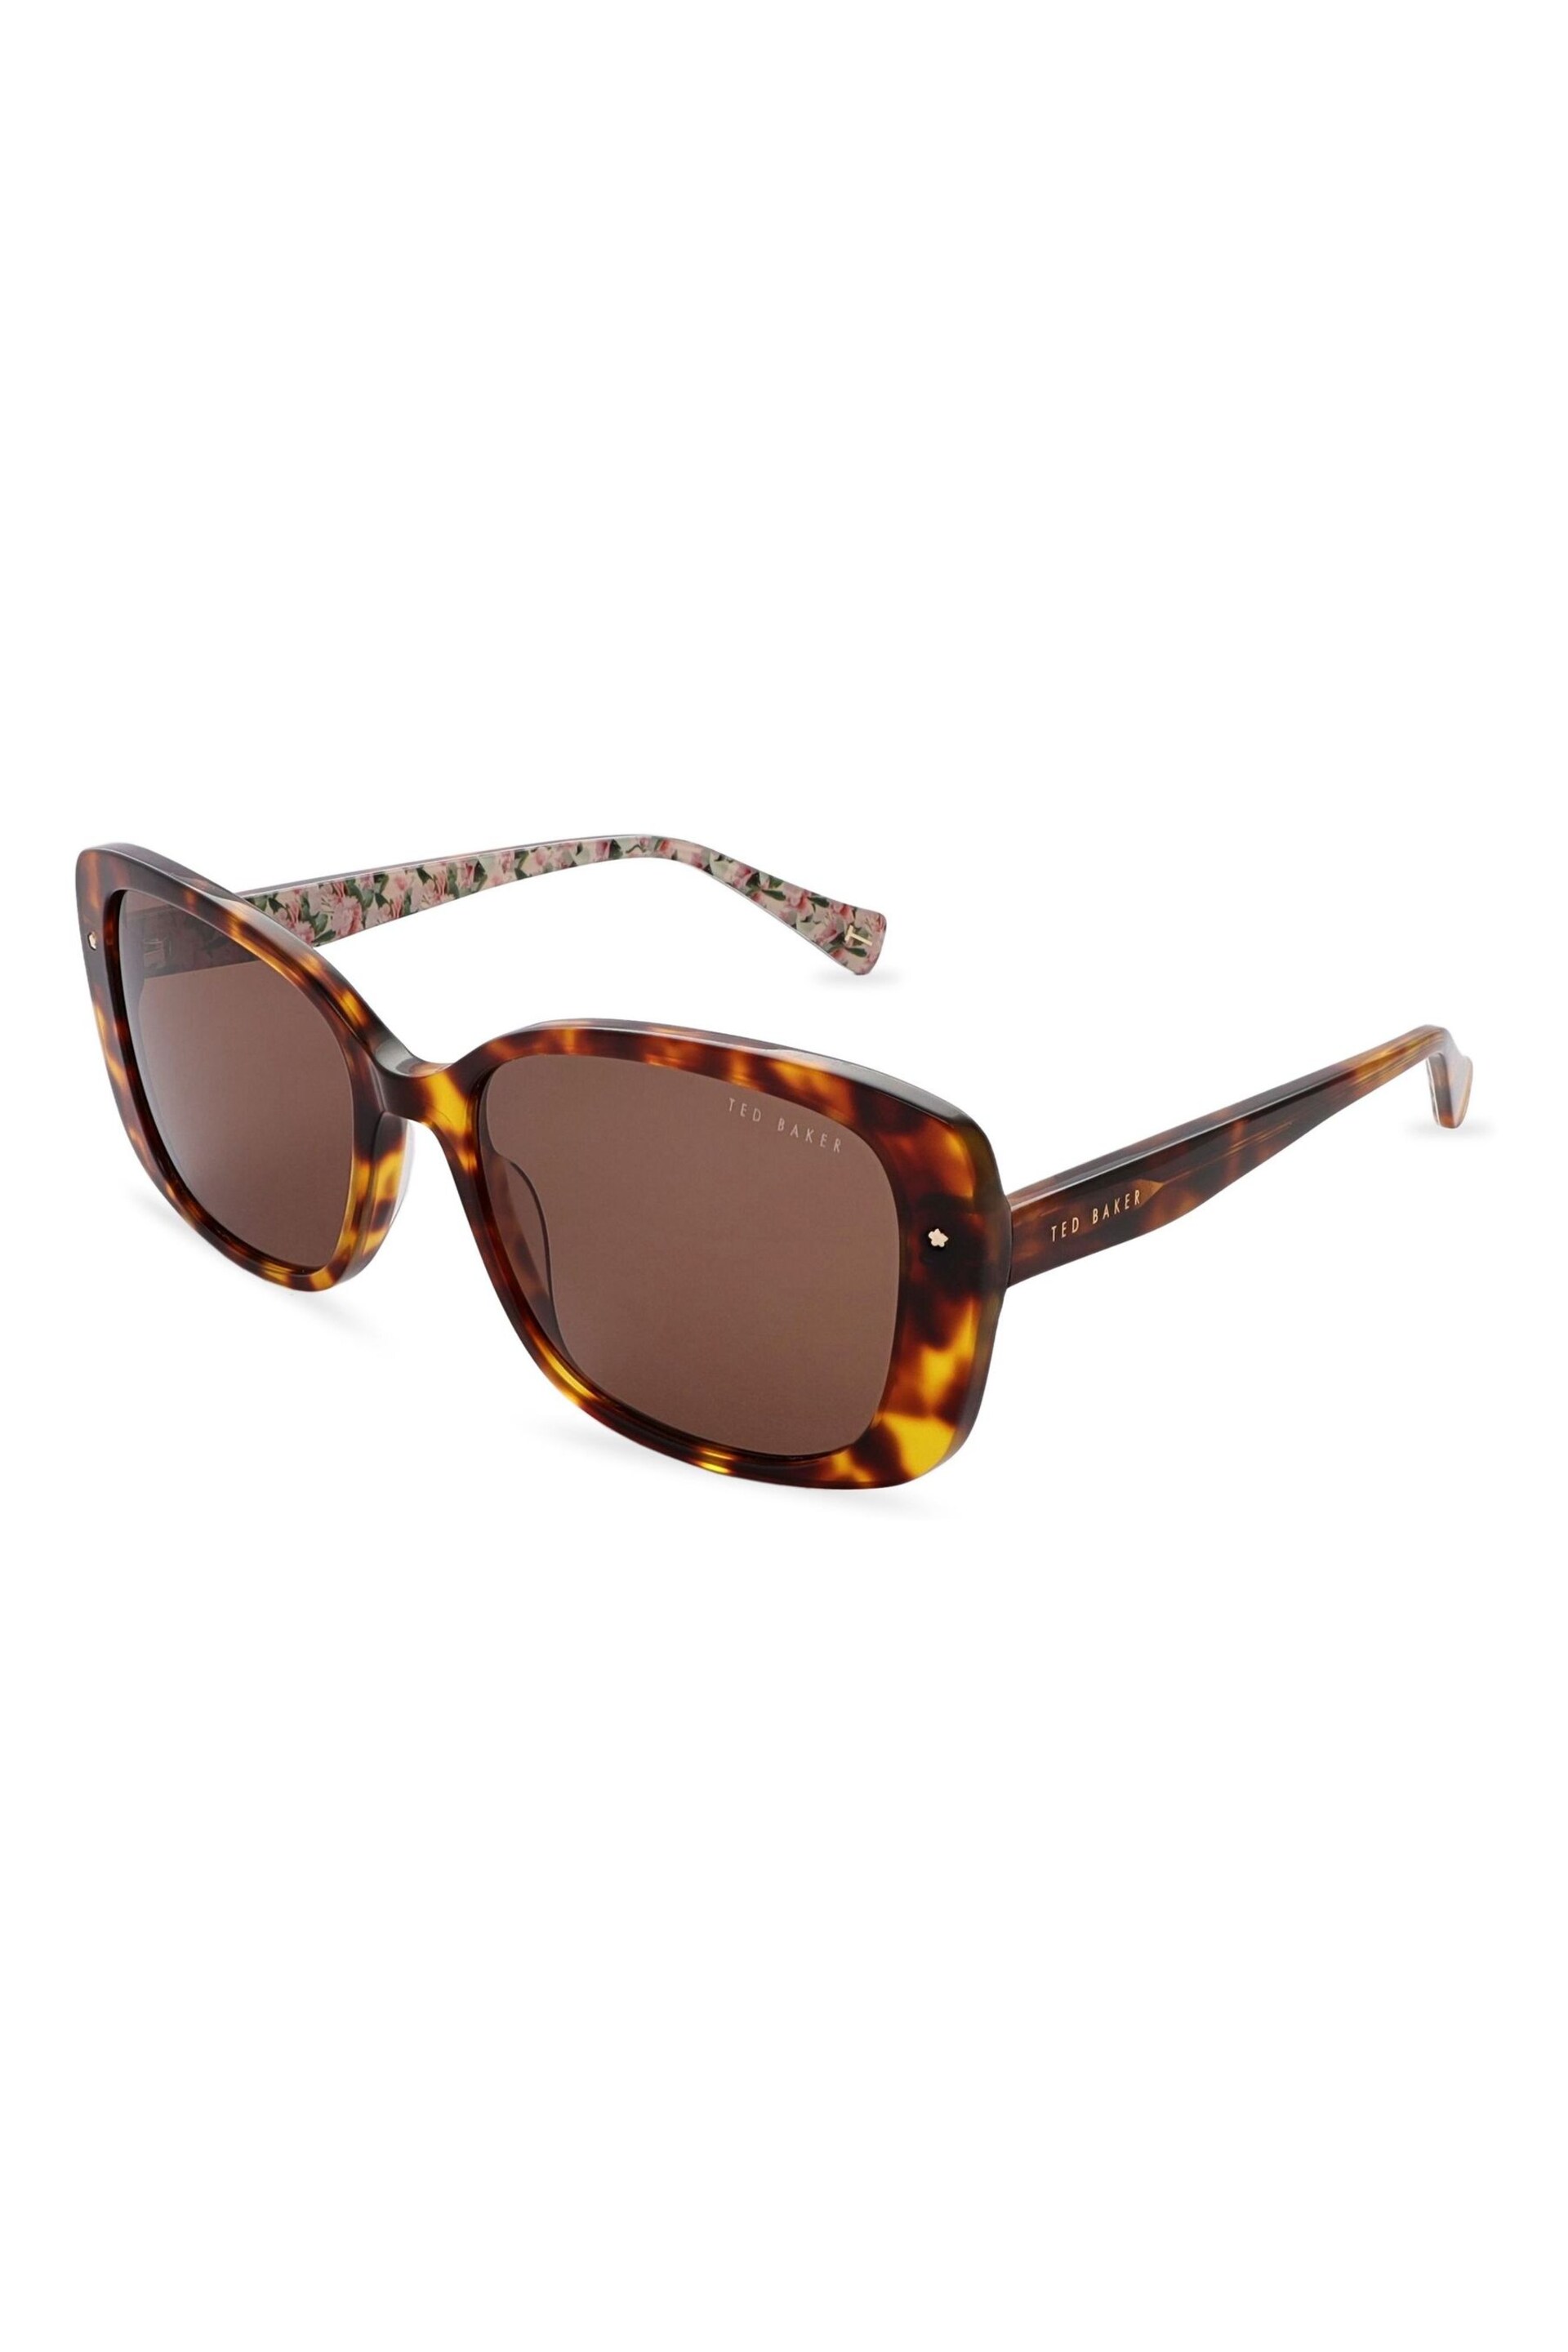 Ted Baker Brown Penelope Sunglasses - Image 1 of 5